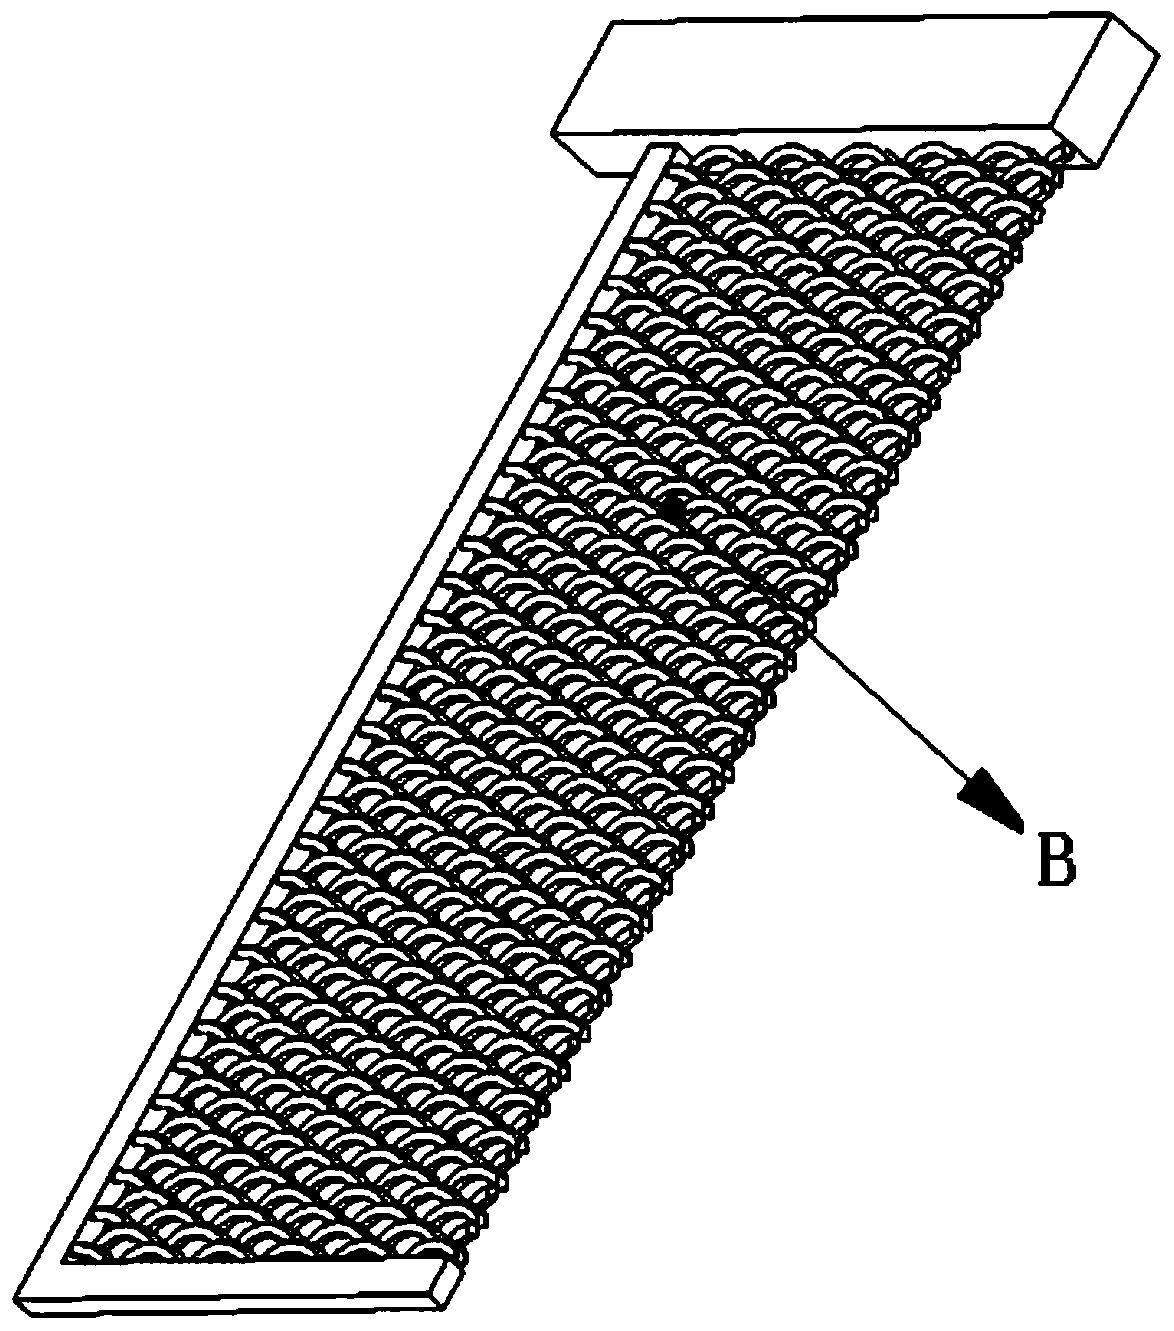 Solid scaly pulp electrolytic cathode device